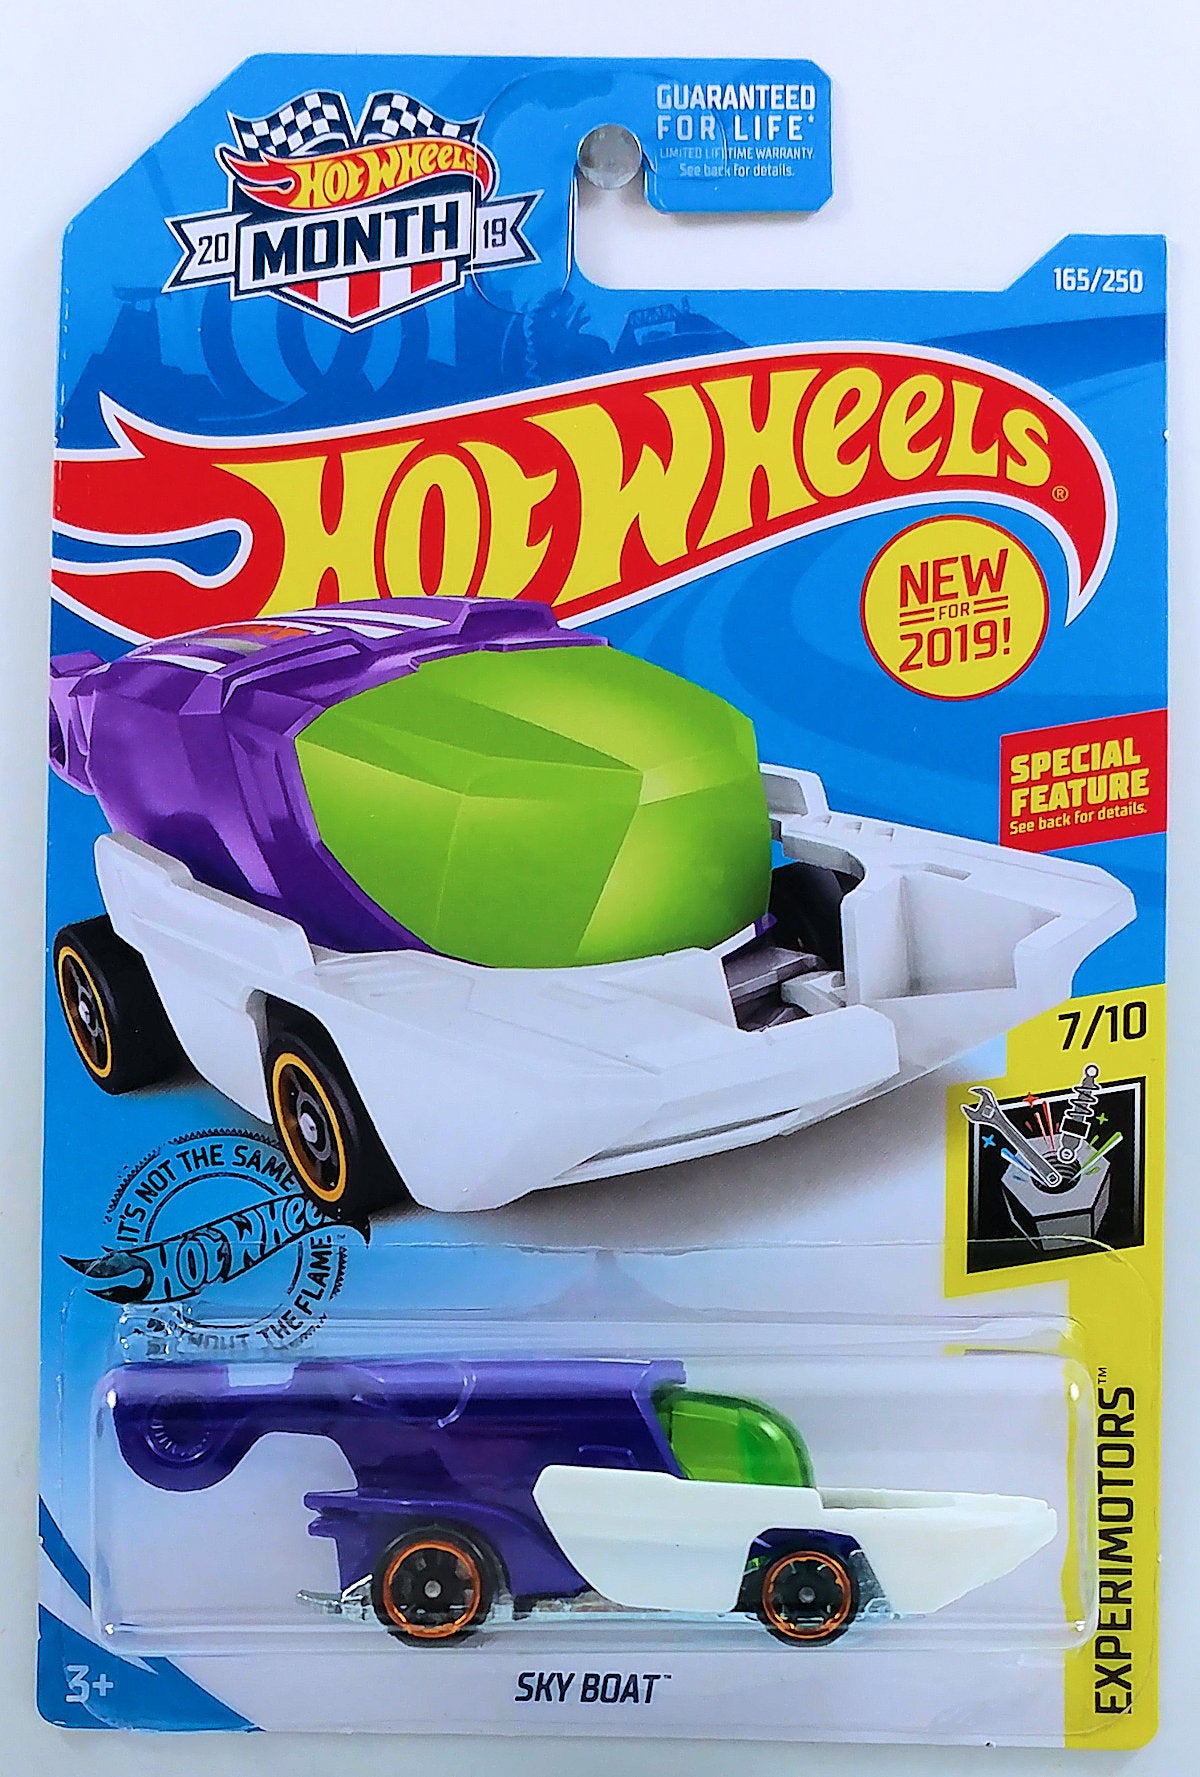 Hot Wheels 2019 - Collector # 165/250 - Experimotors 7/10 - New Models - Sky Boat - Purple & White - Month